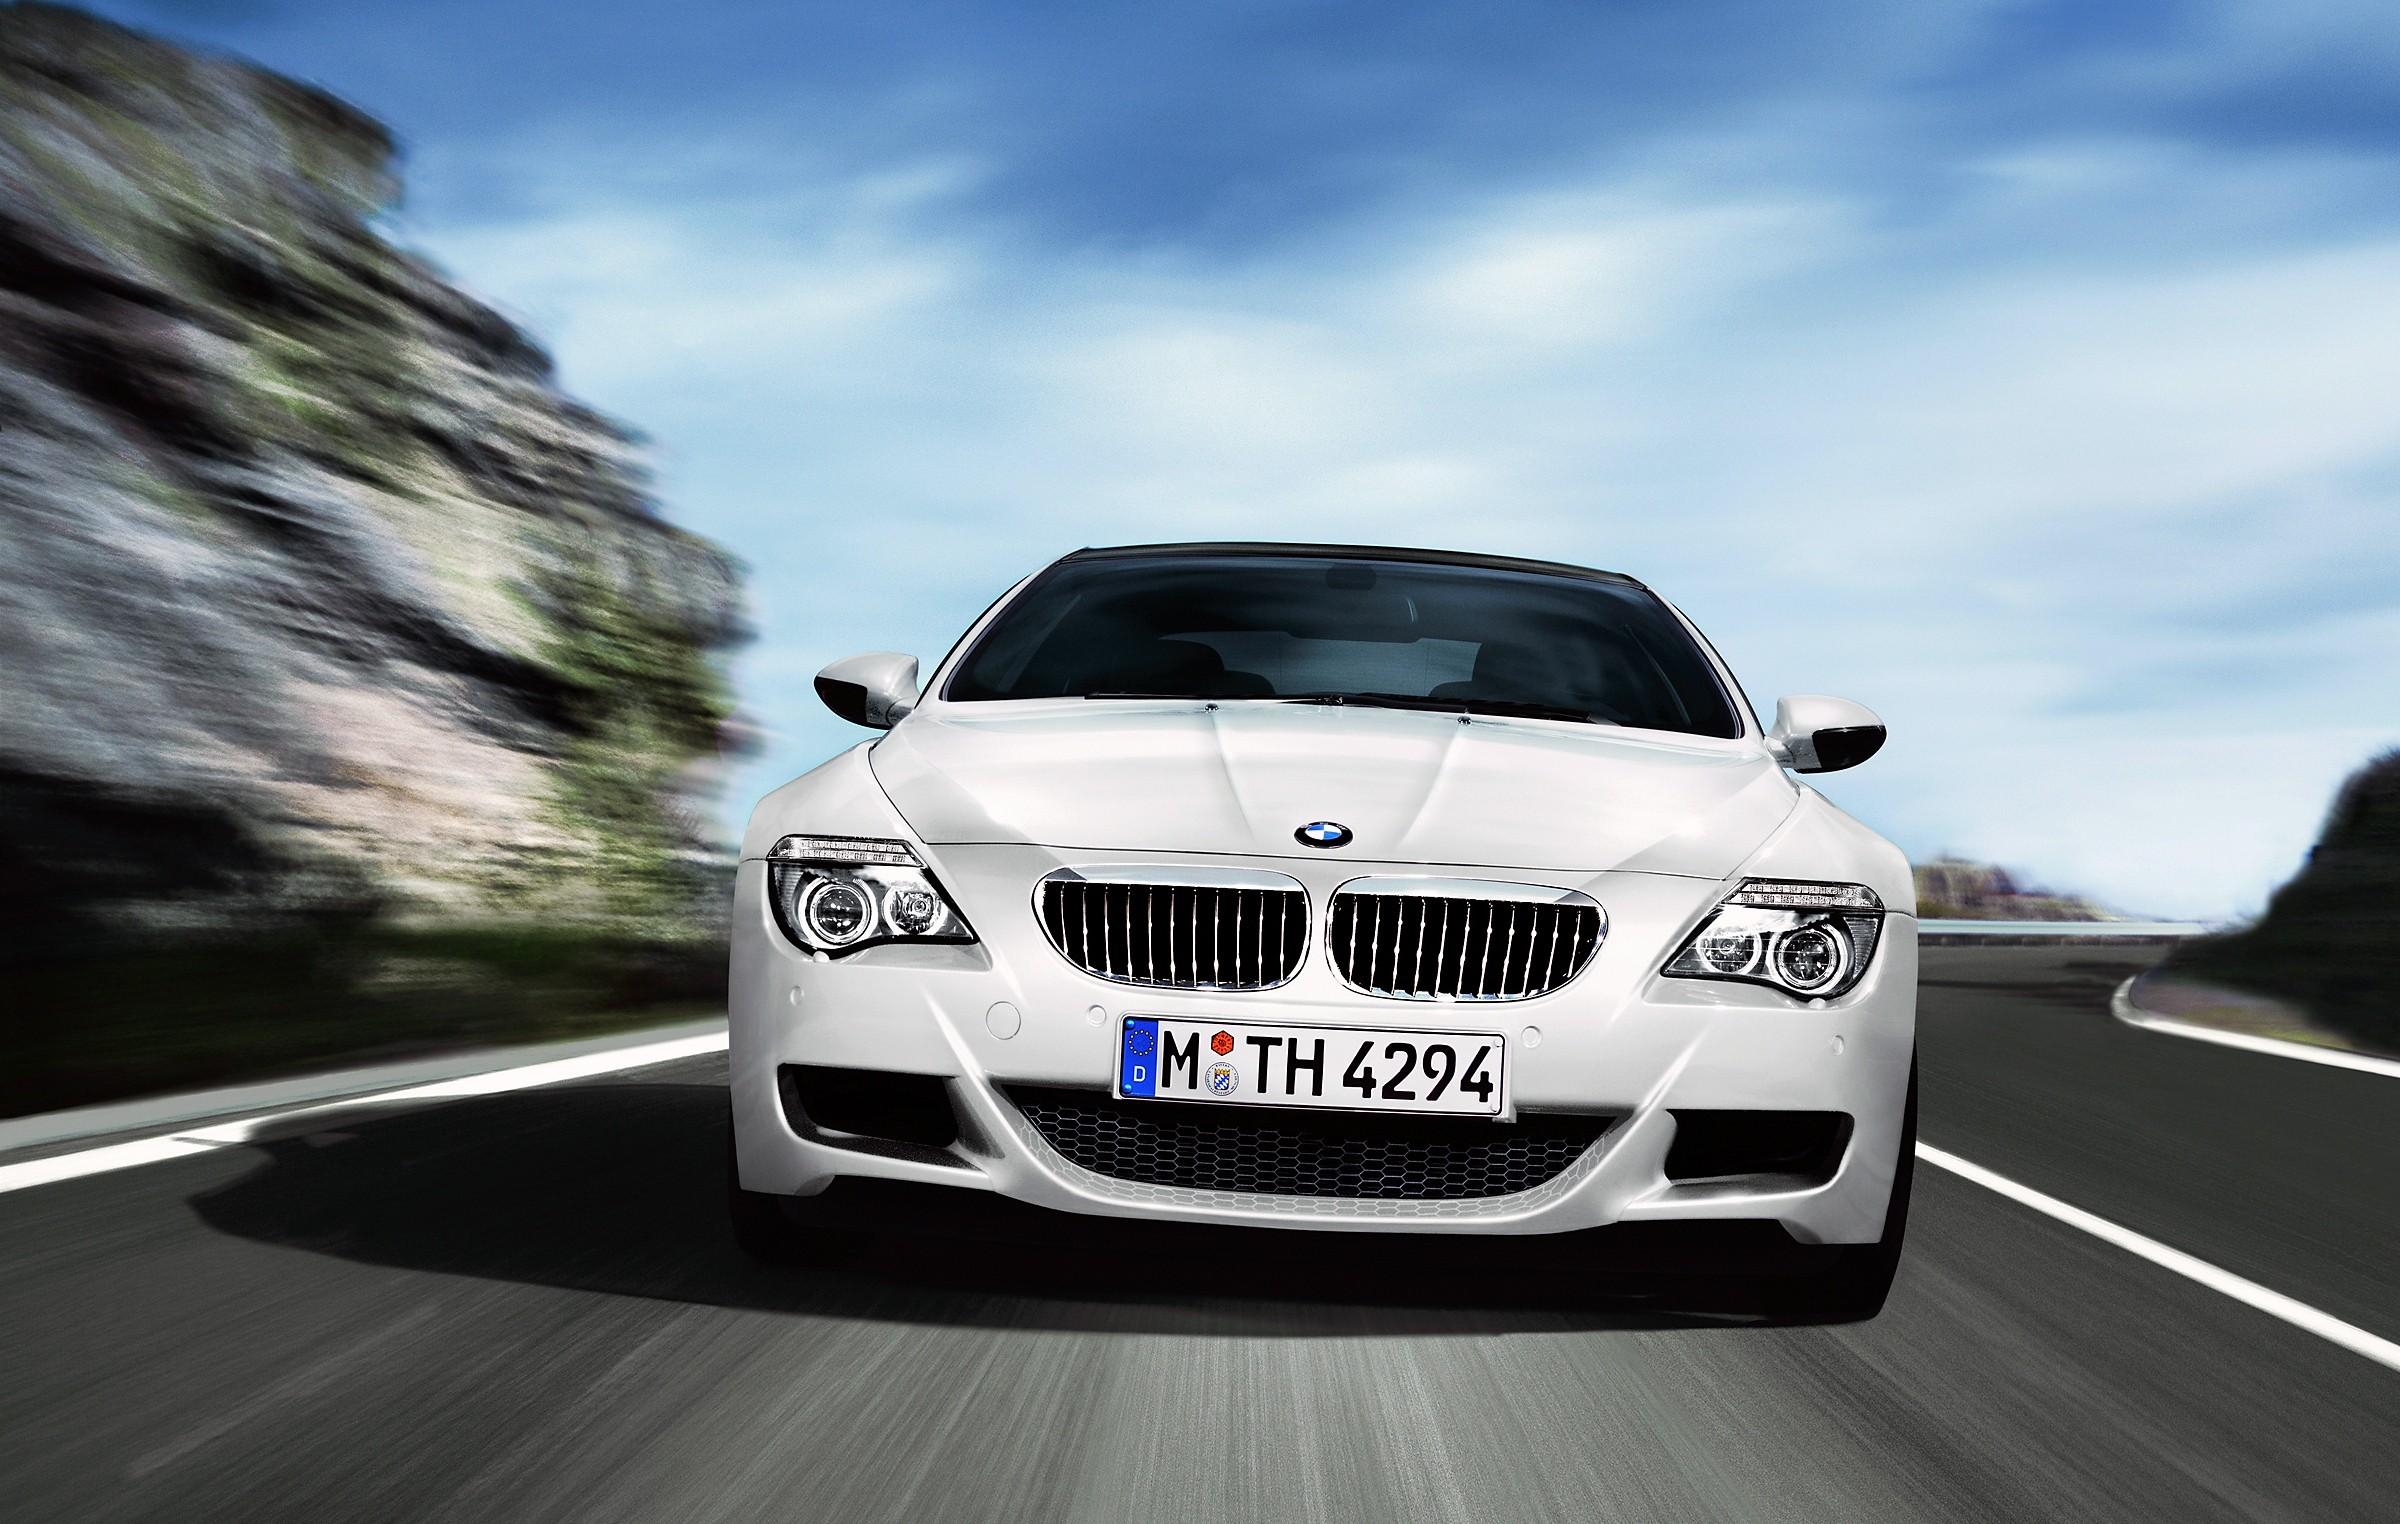 Bmw 630i sport coupe review #4